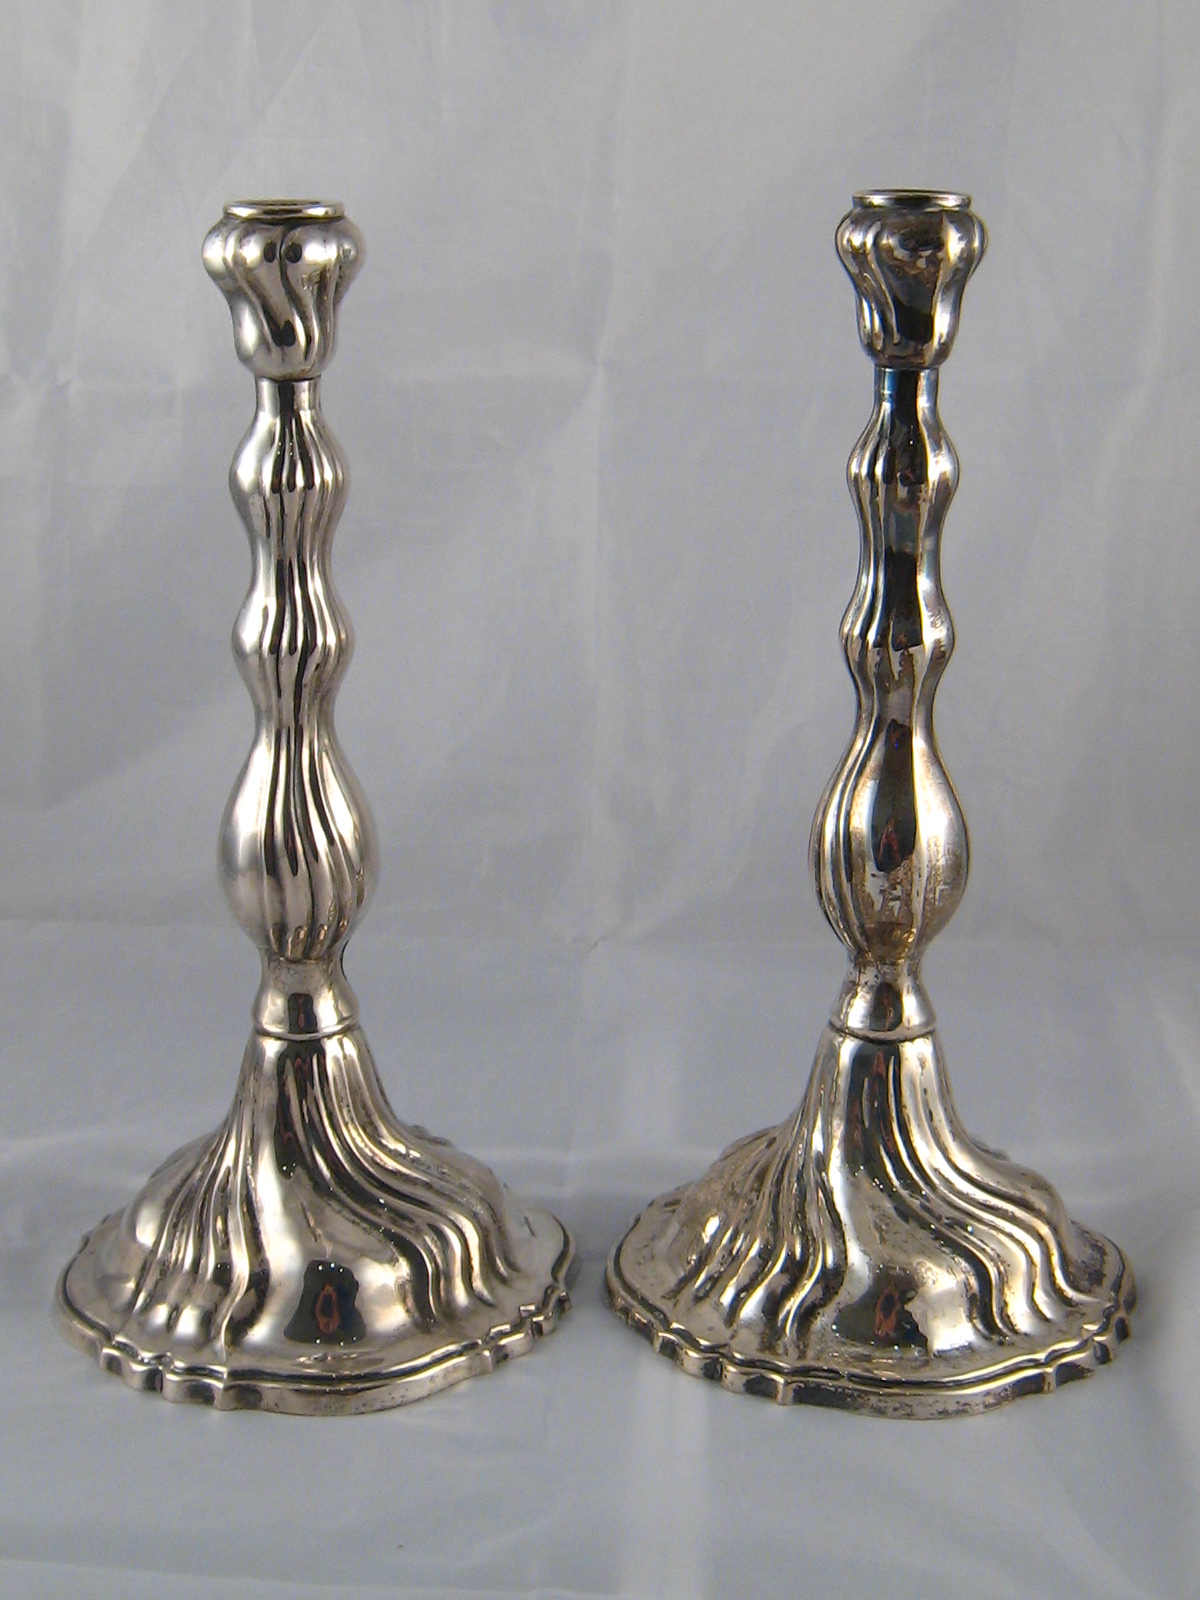 A pair of Israeli silver, marked 800, Shabat candlesticks, ht. 30cm. , wt. 494gm.